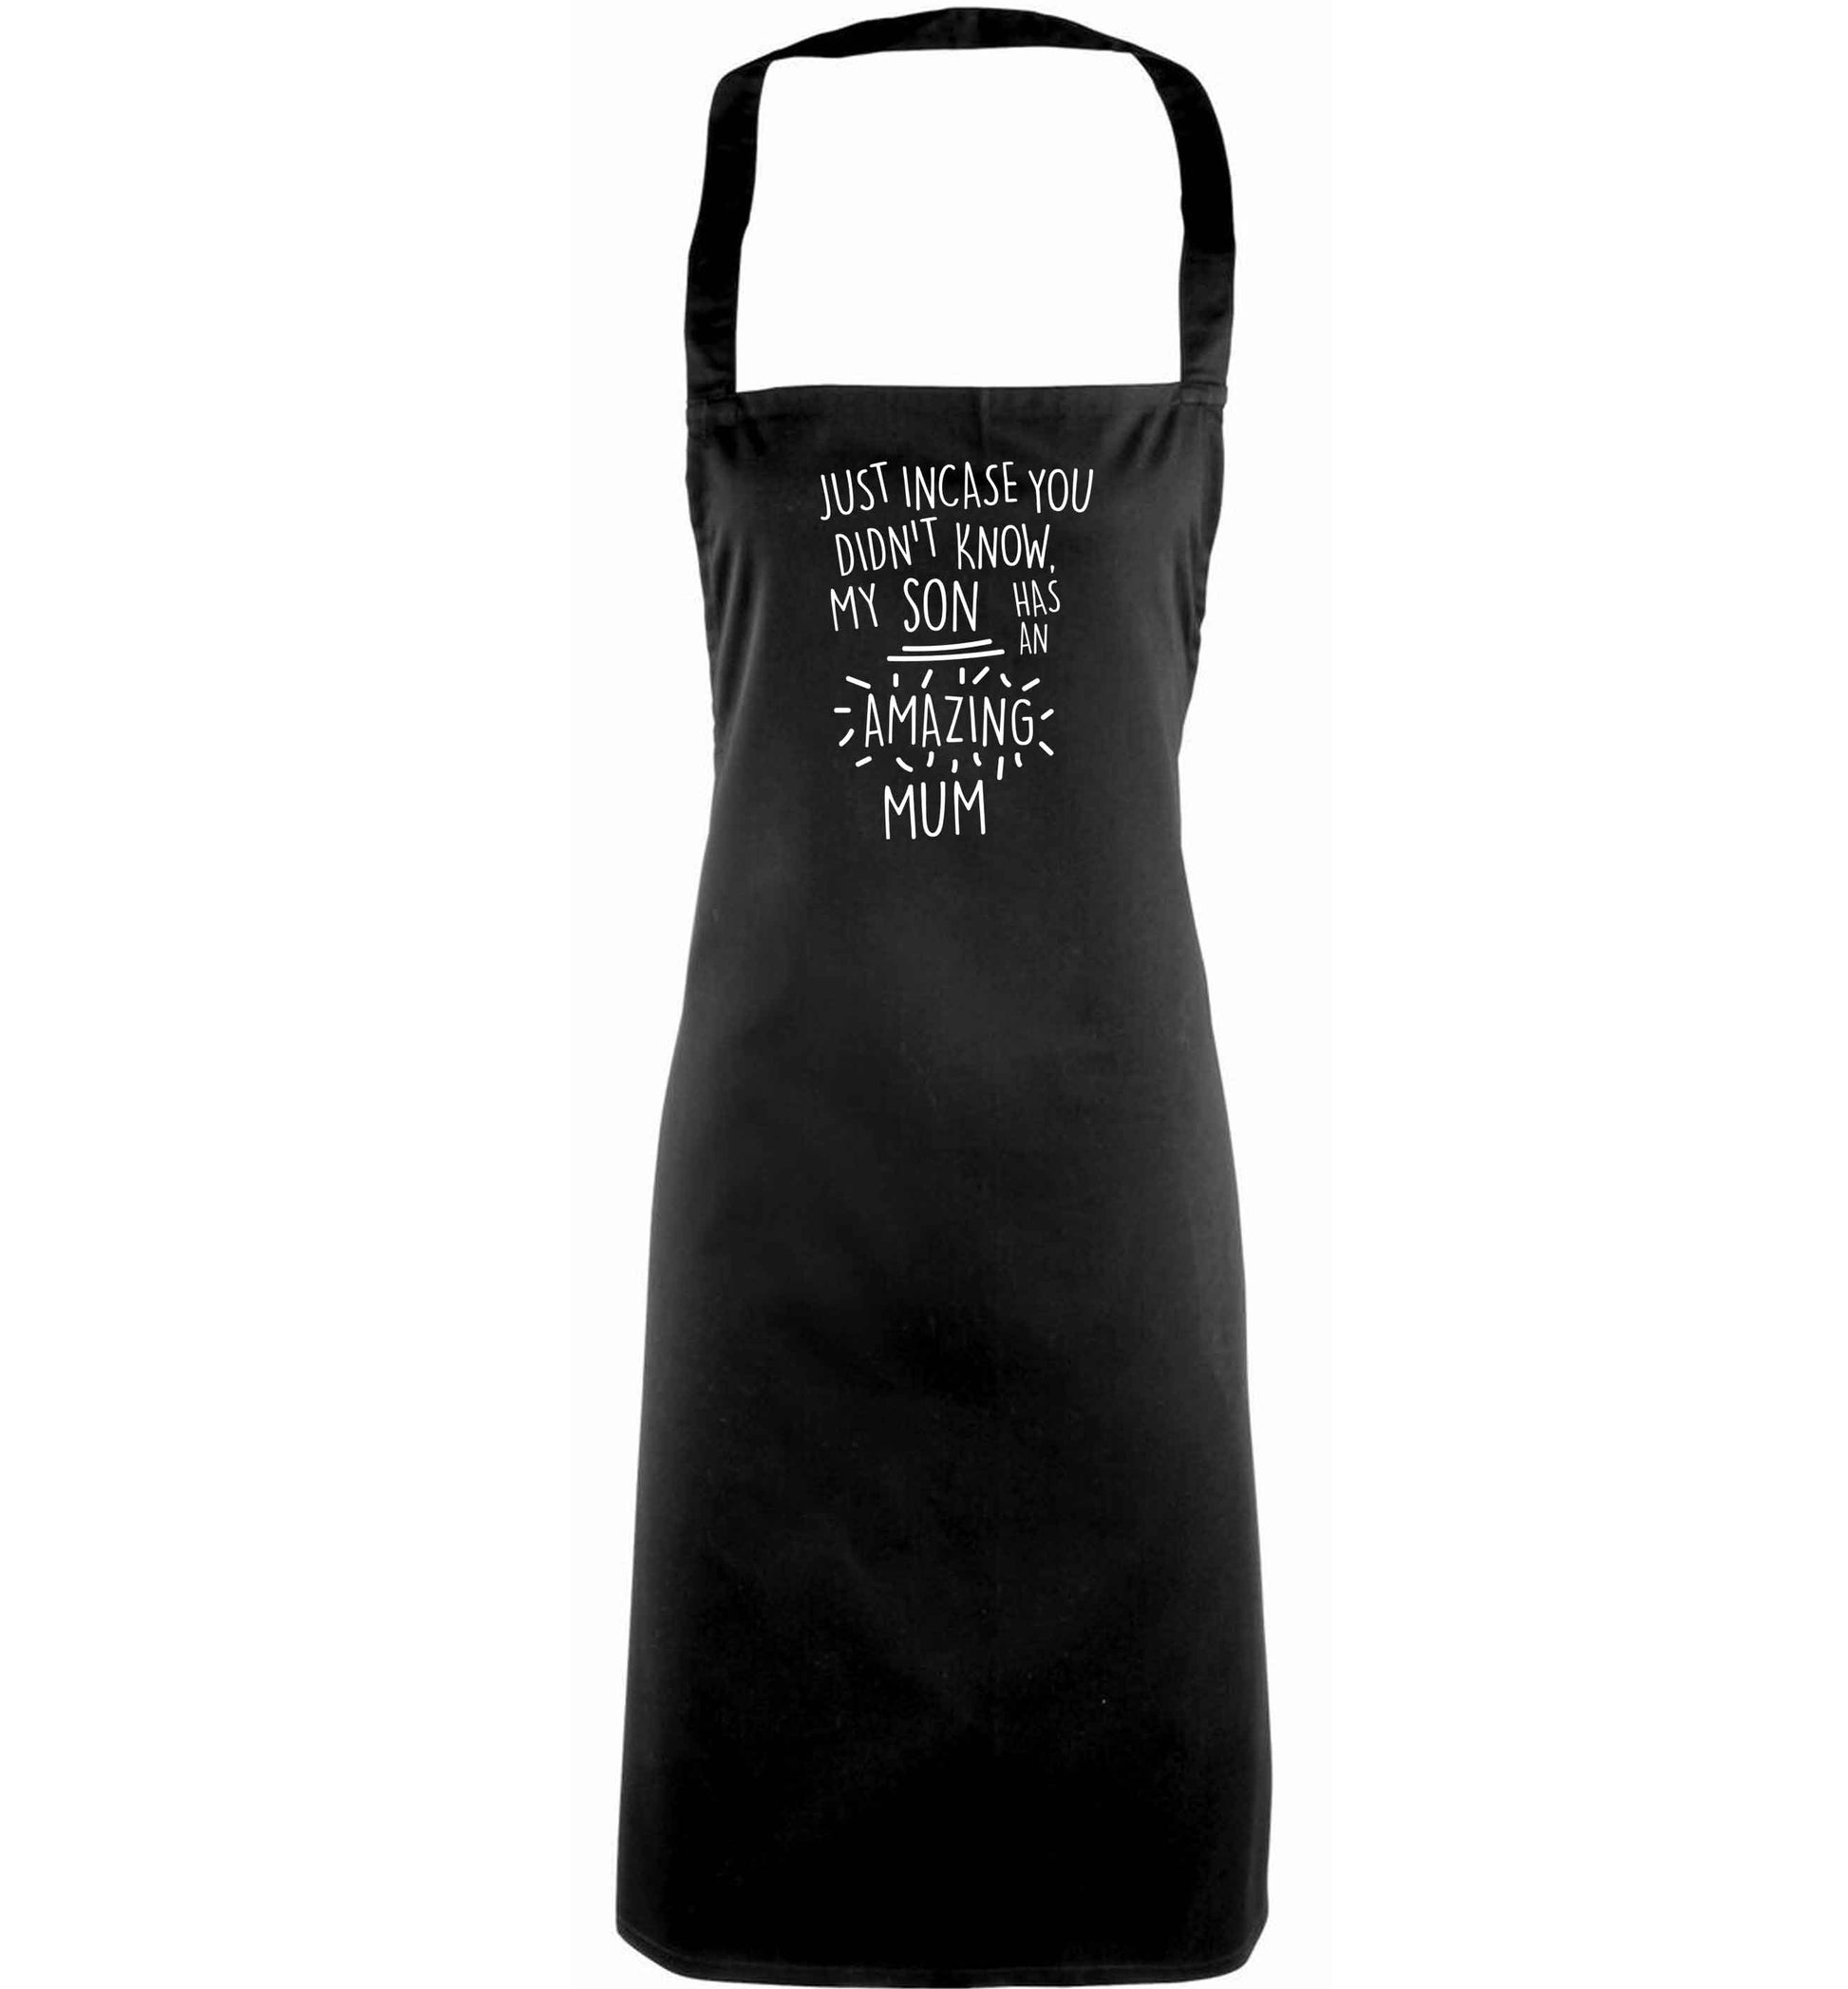 Just incase you didn't know my son has an amazing mum adults black apron